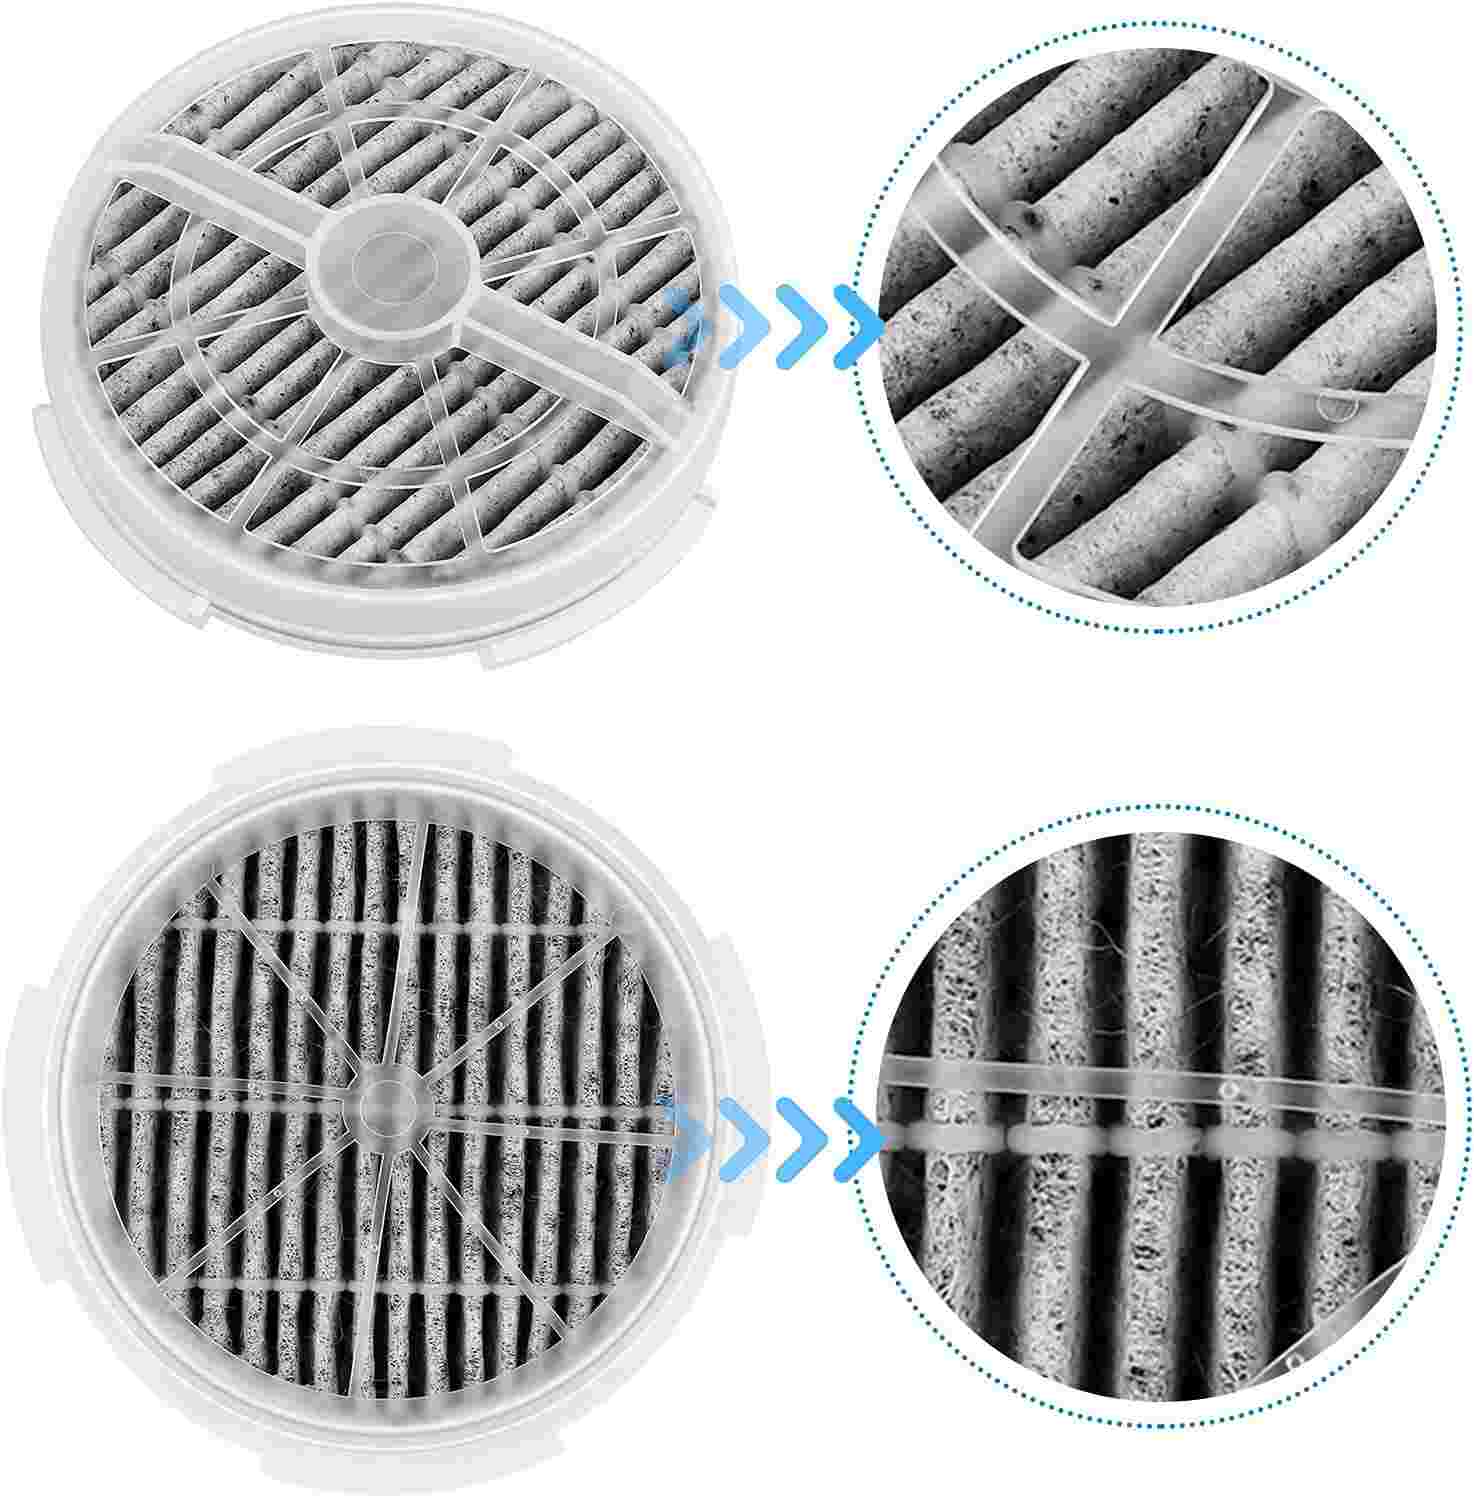 GL2103 HEPA Replacement Filter 2 Pack, Compatible with RIGOGLIOSO Air Purifier GL2103 SY900S, JINPUS GL-2103, LTLKY 900S